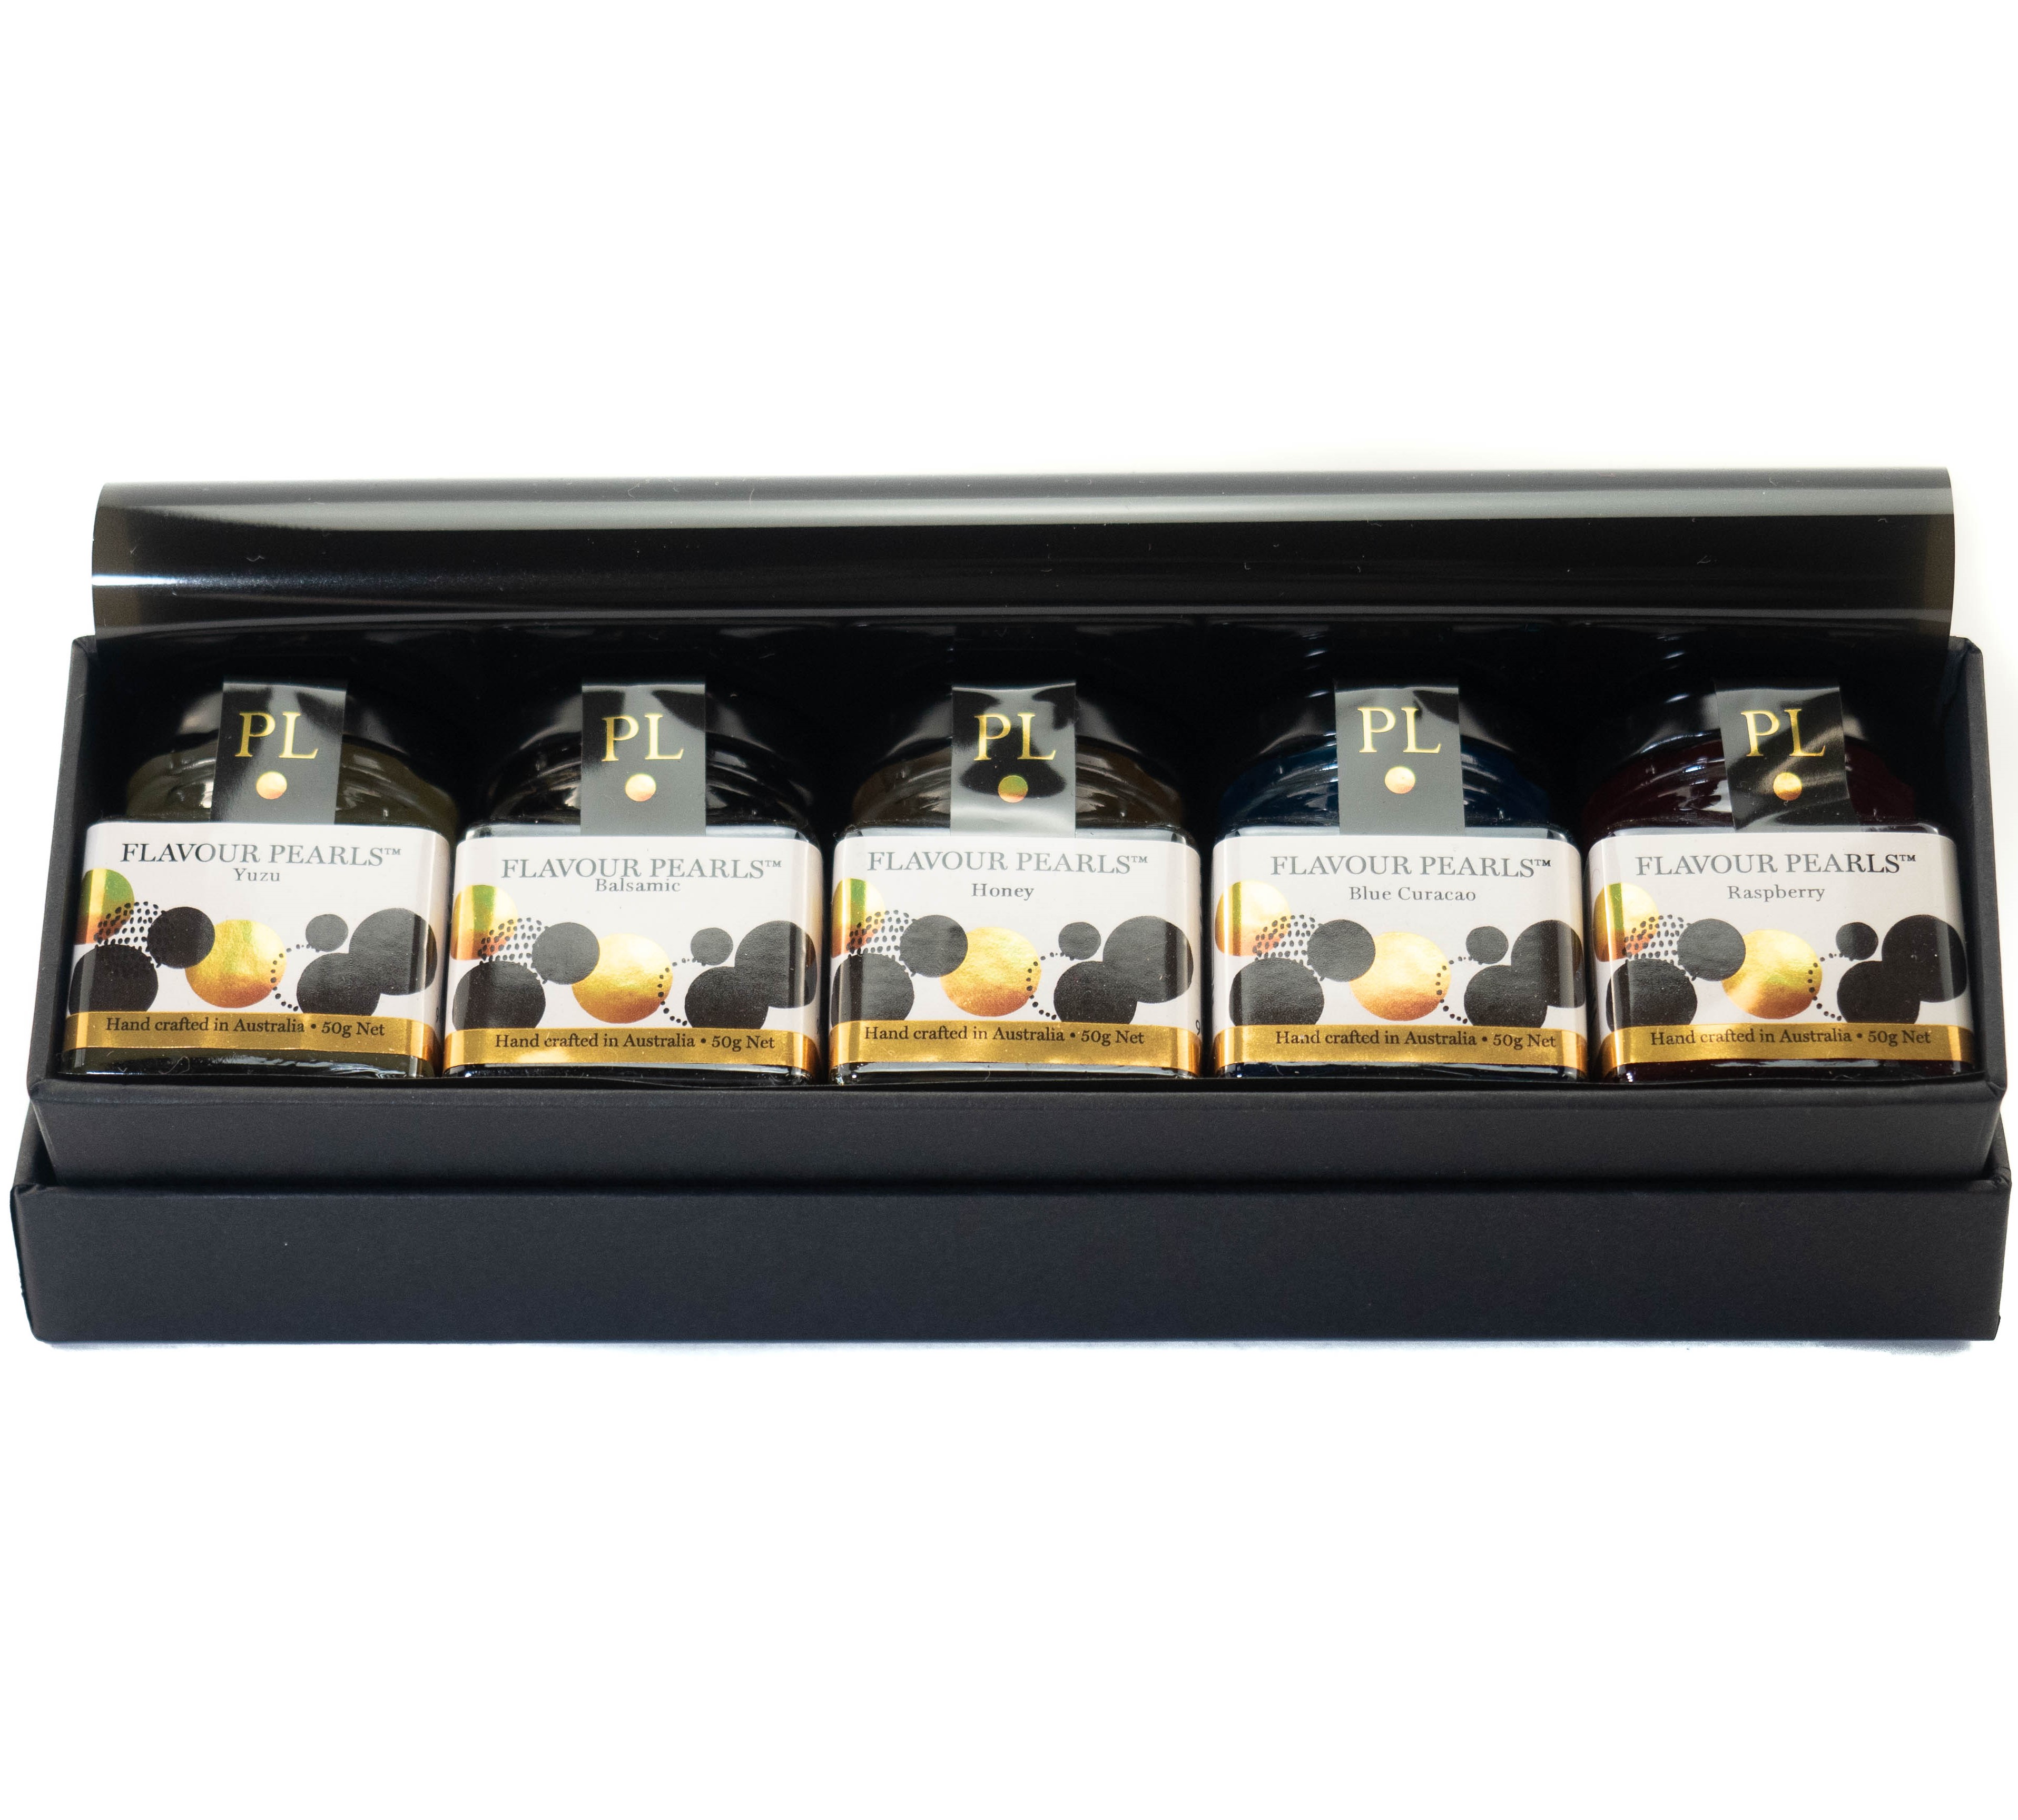 Peninsula Larders Gourmet gift box with 5 jars of Flavour Pearls and a serving spoon